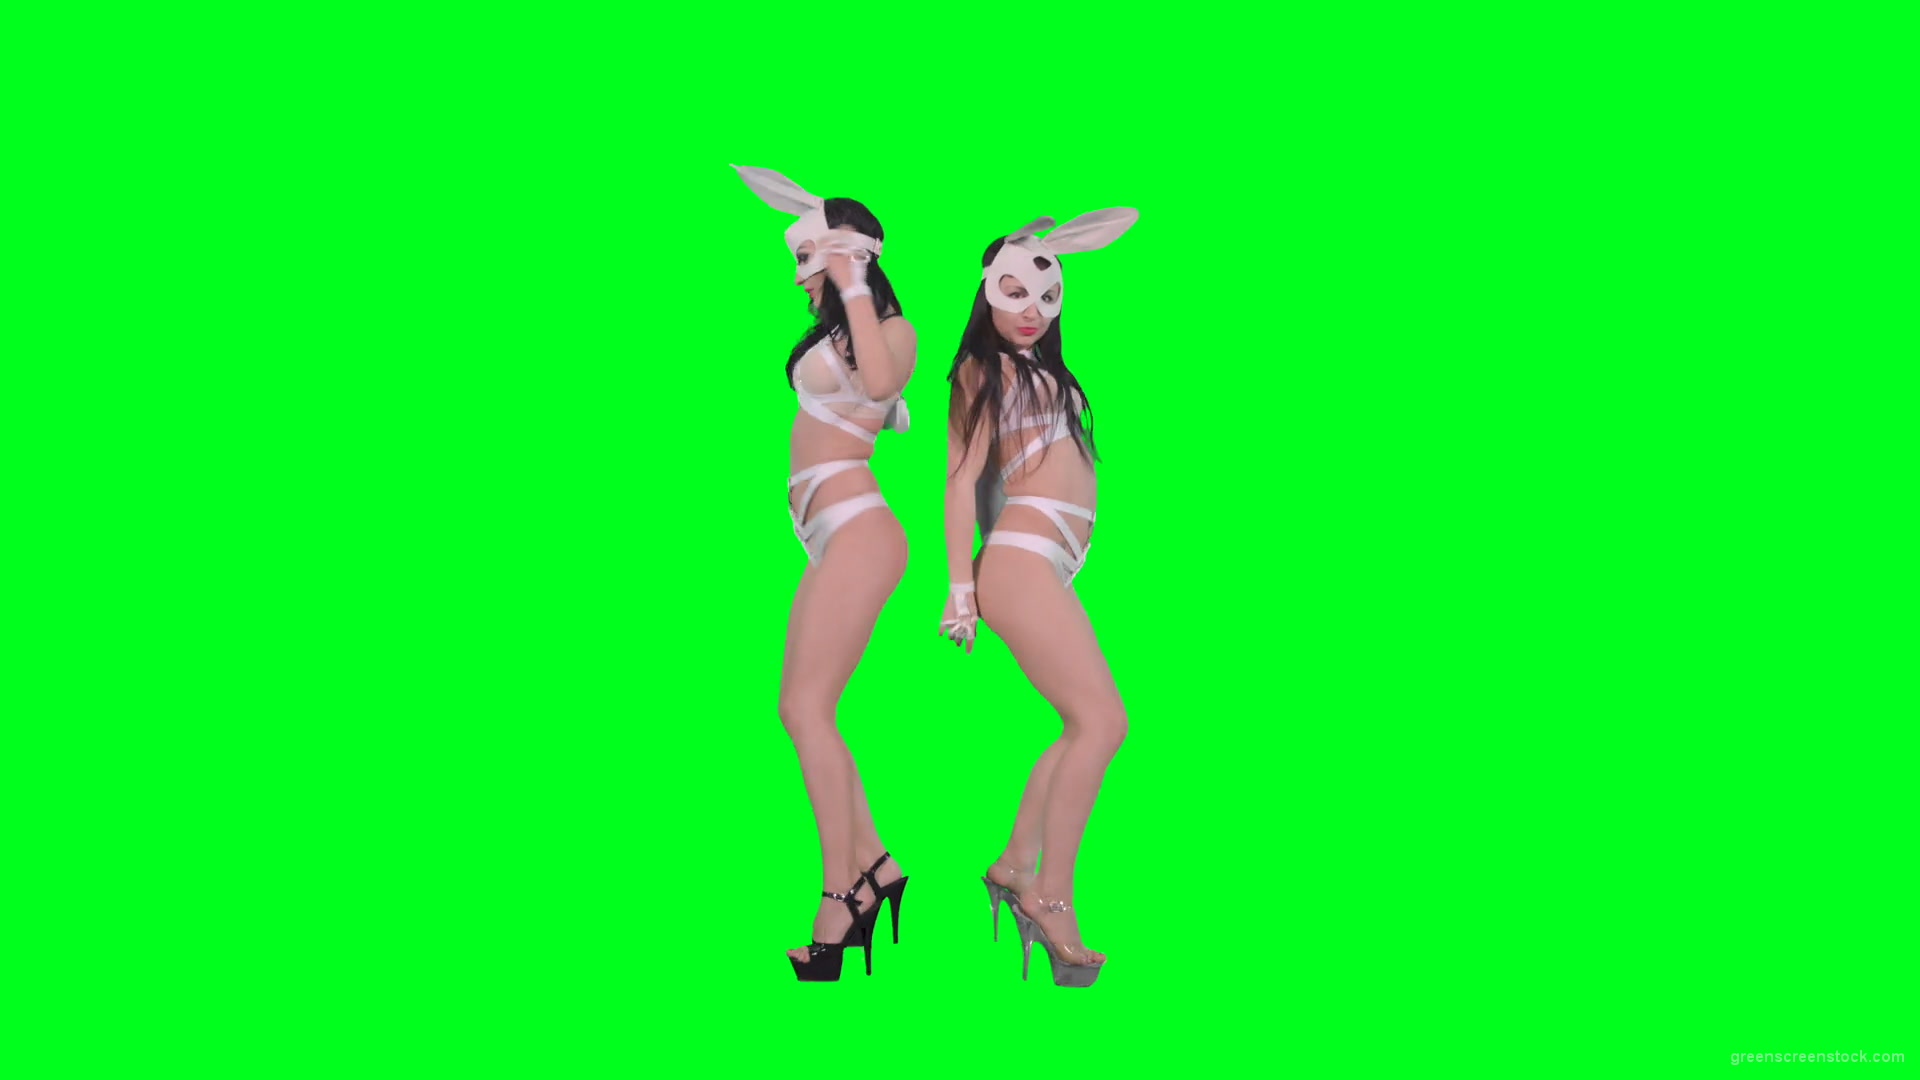 Go-Go-Dancing-female-team-duet-making-erotic-moves-on-green-screen-4K-Video-Footage-1920_004 Green Screen Stock